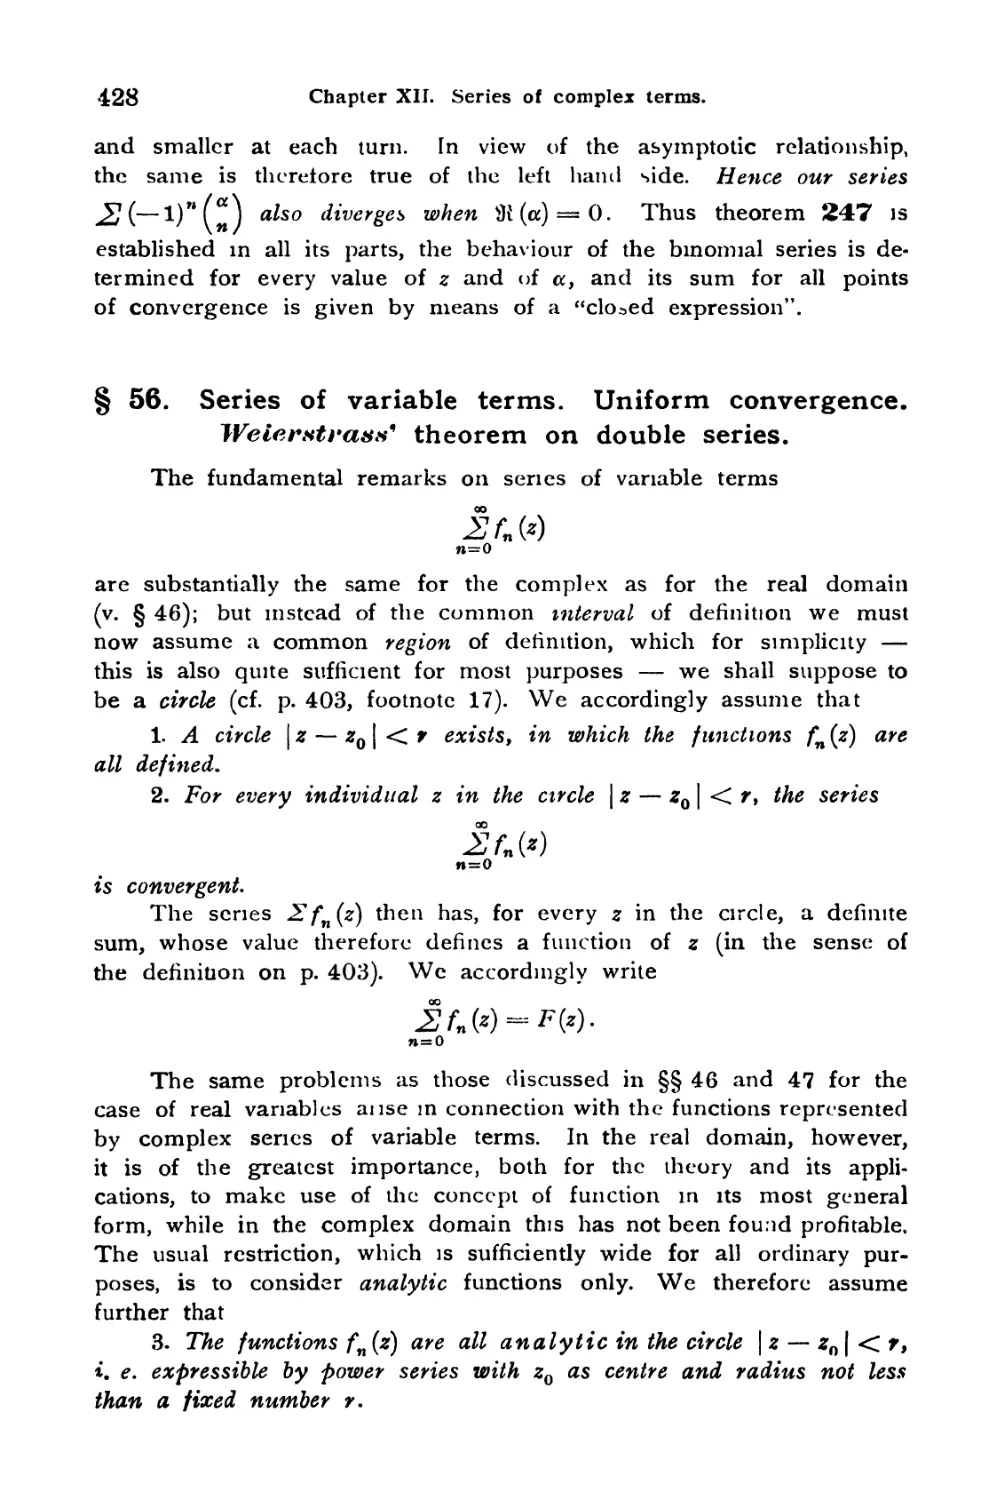 § 56. Series of variable terms. Uniform convergence. Weierstrass' theorem on double series